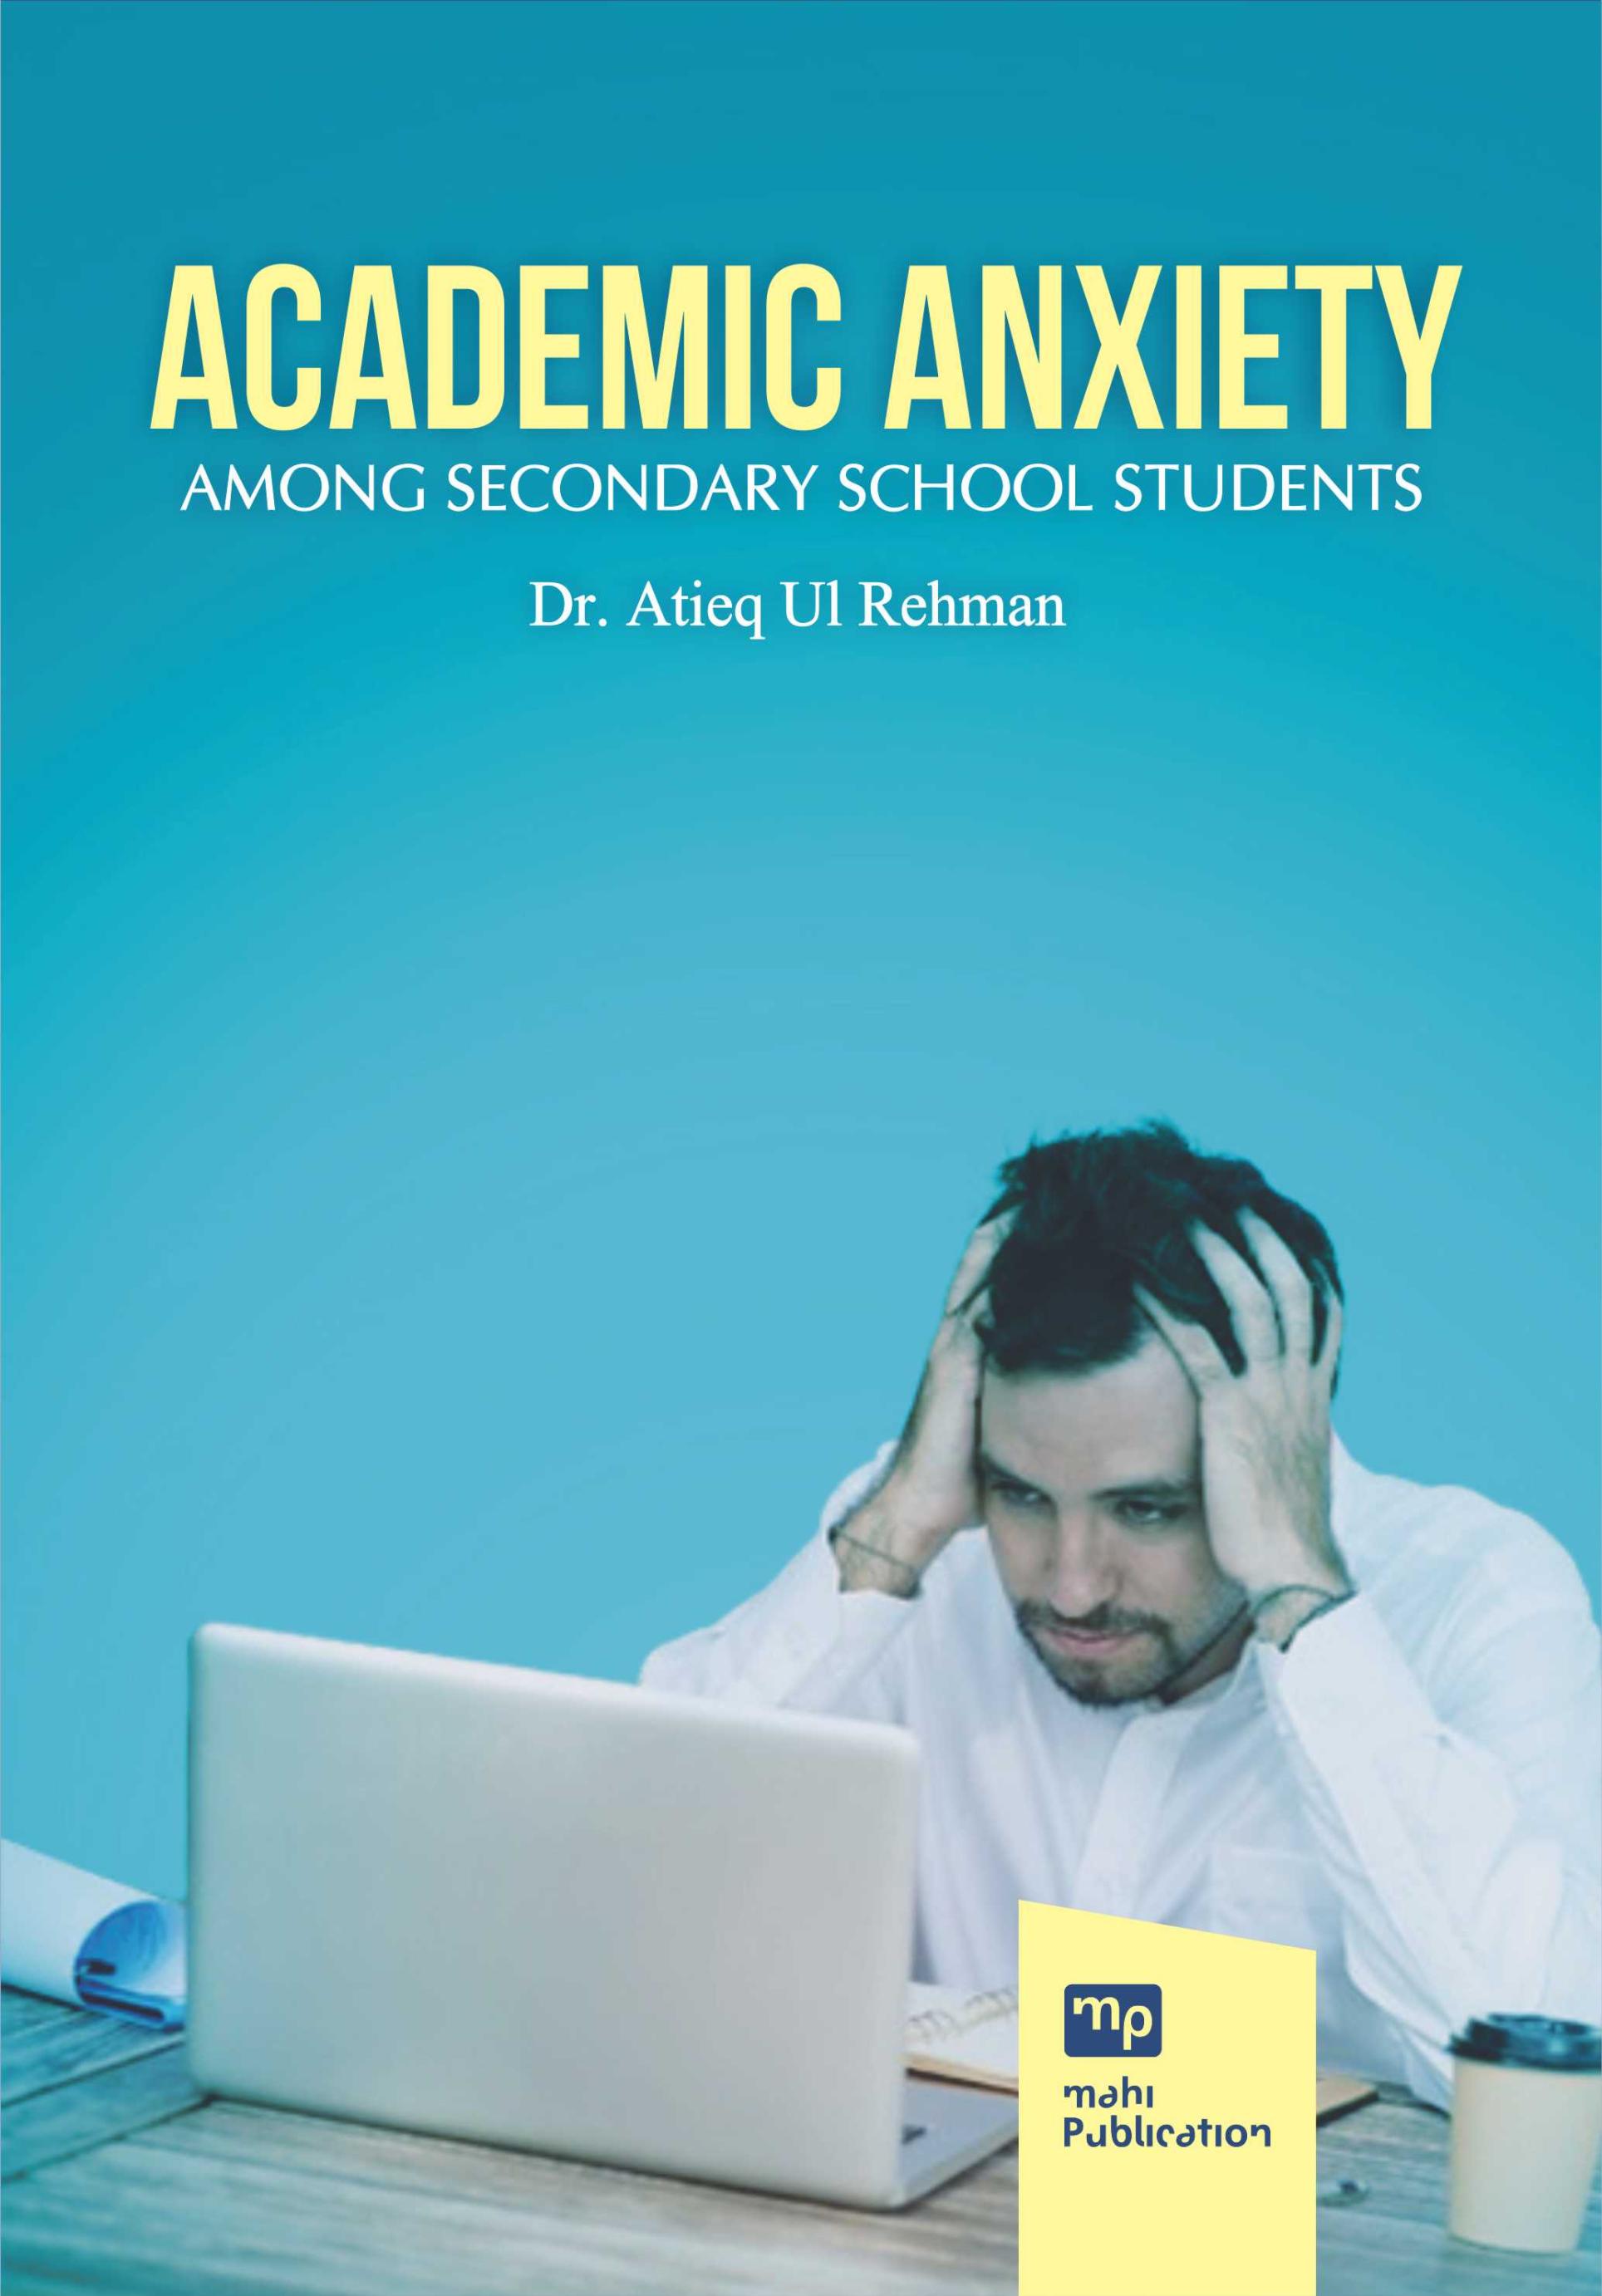 Academic Anxiety among Secondary School Students